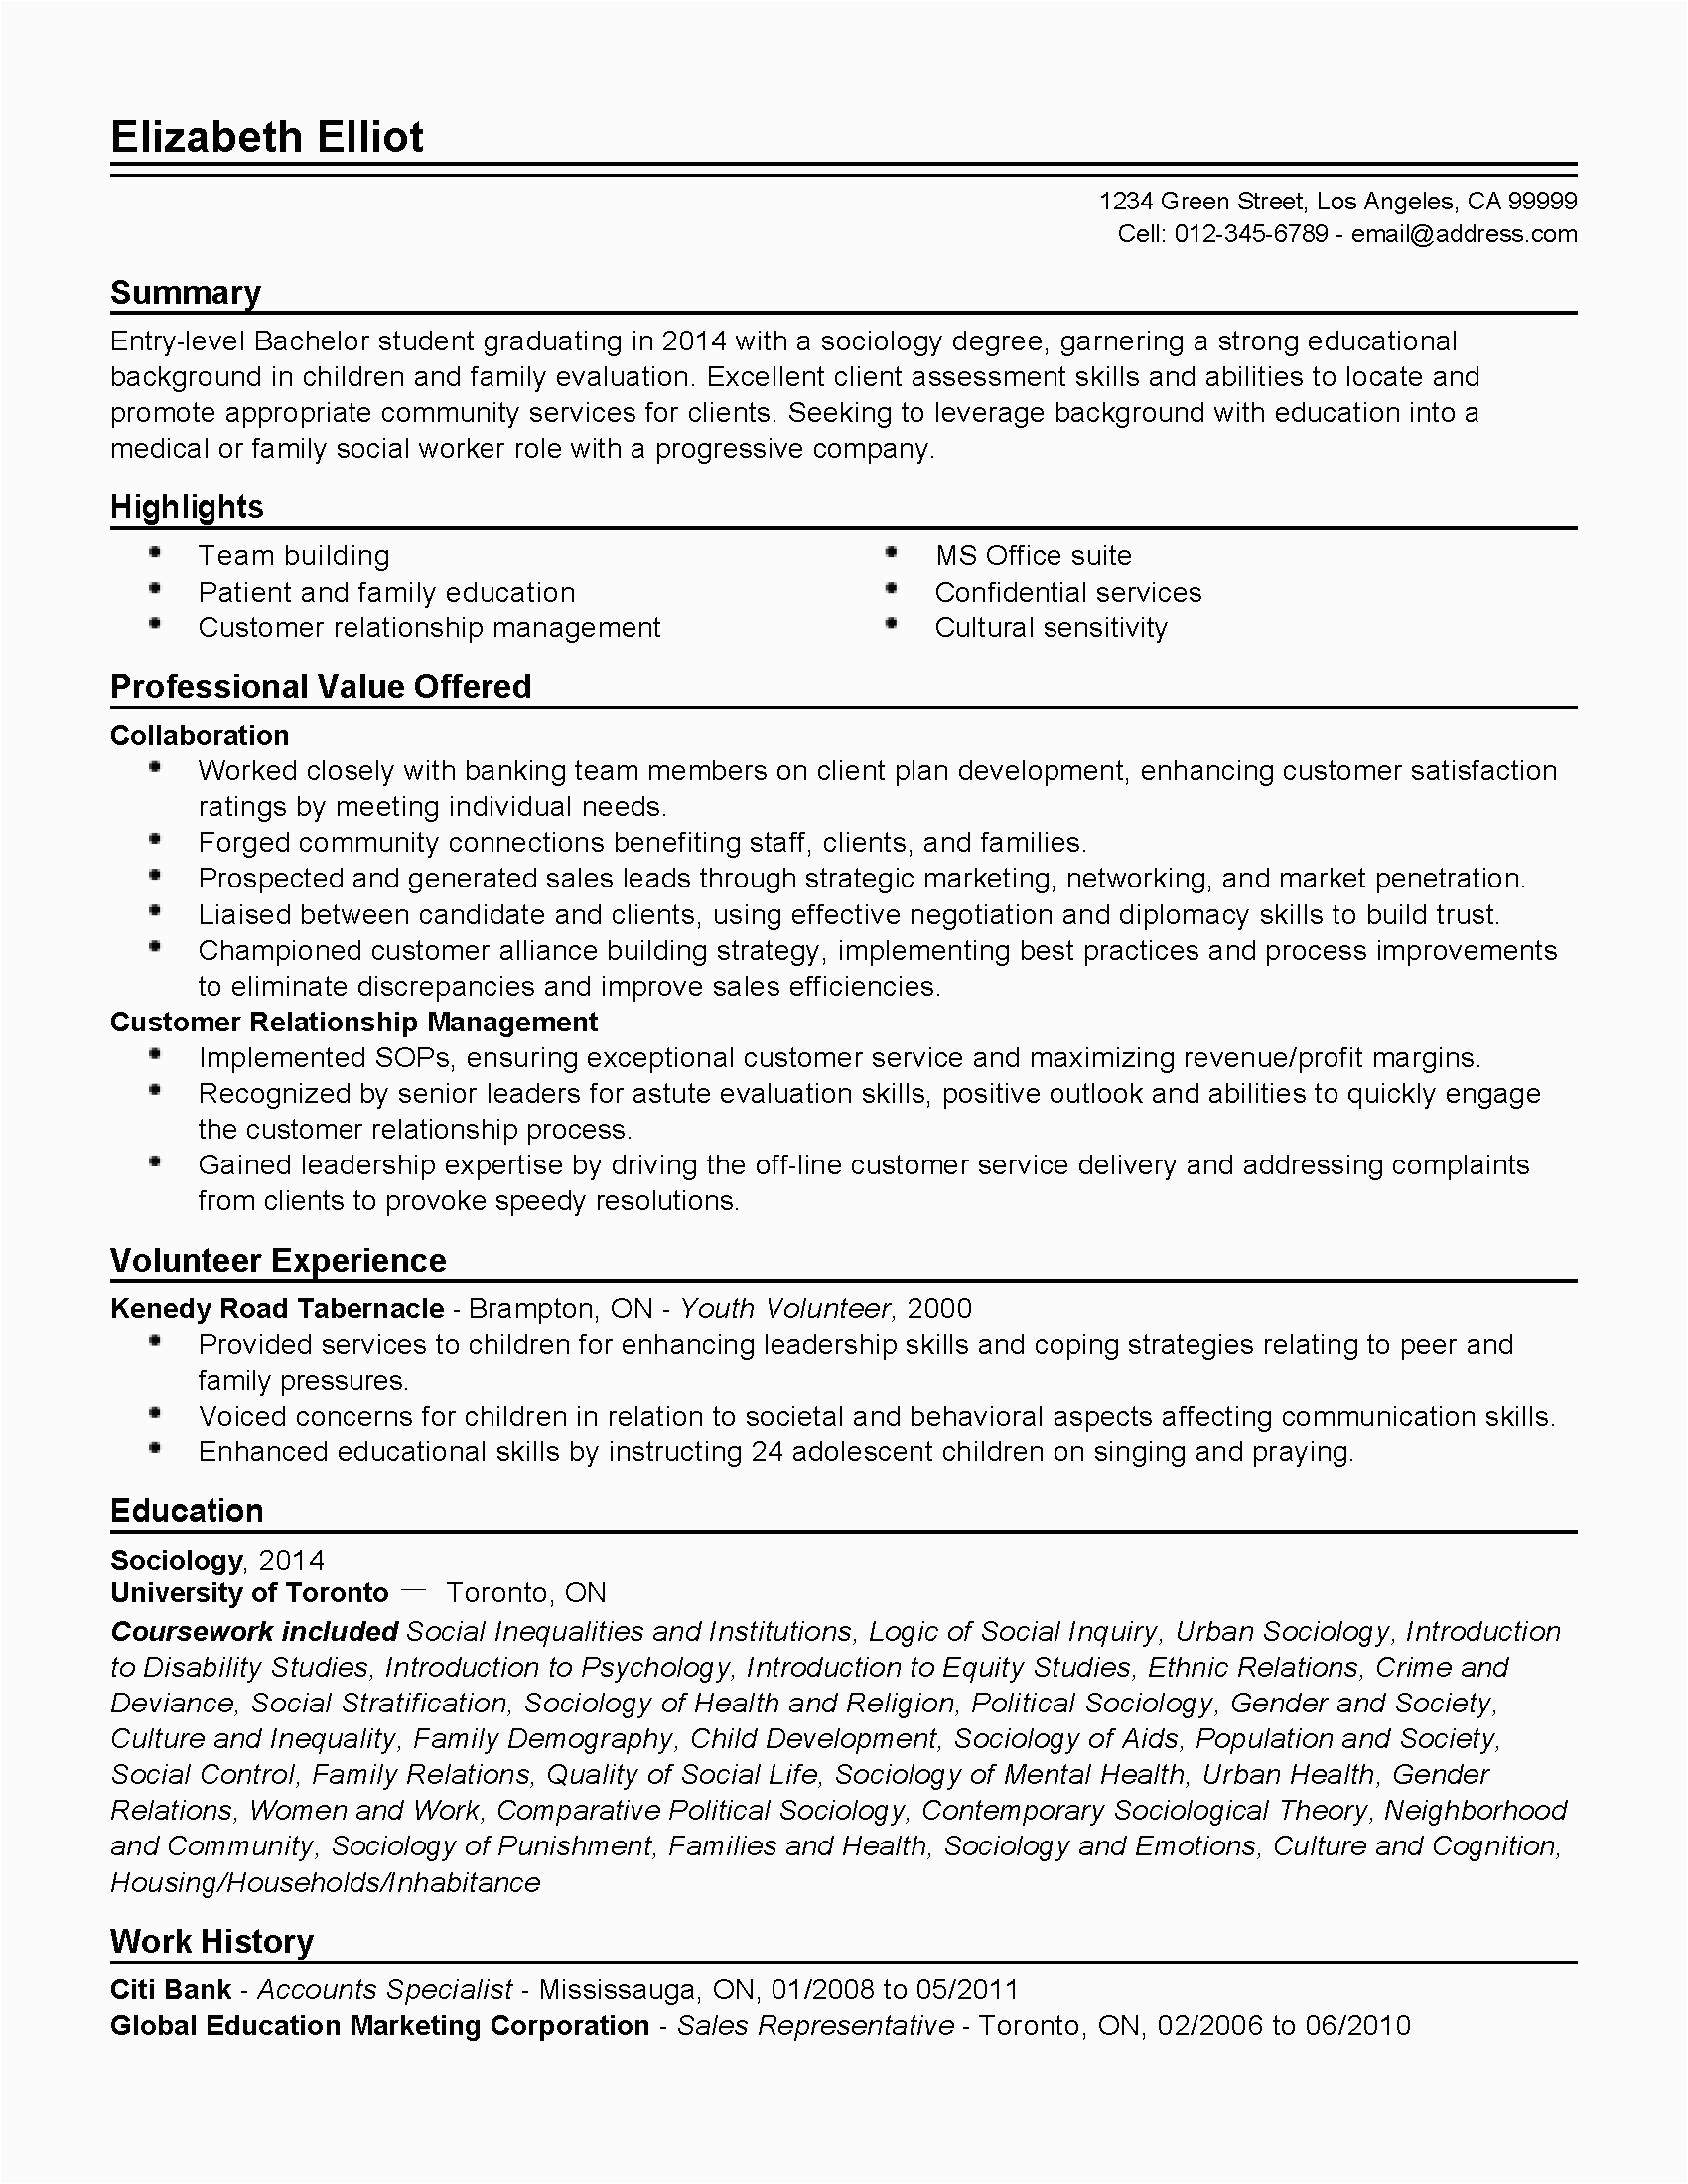 Sample Resume for social Worker with No Experience Entry Level social Worker Cover Letter No Experience